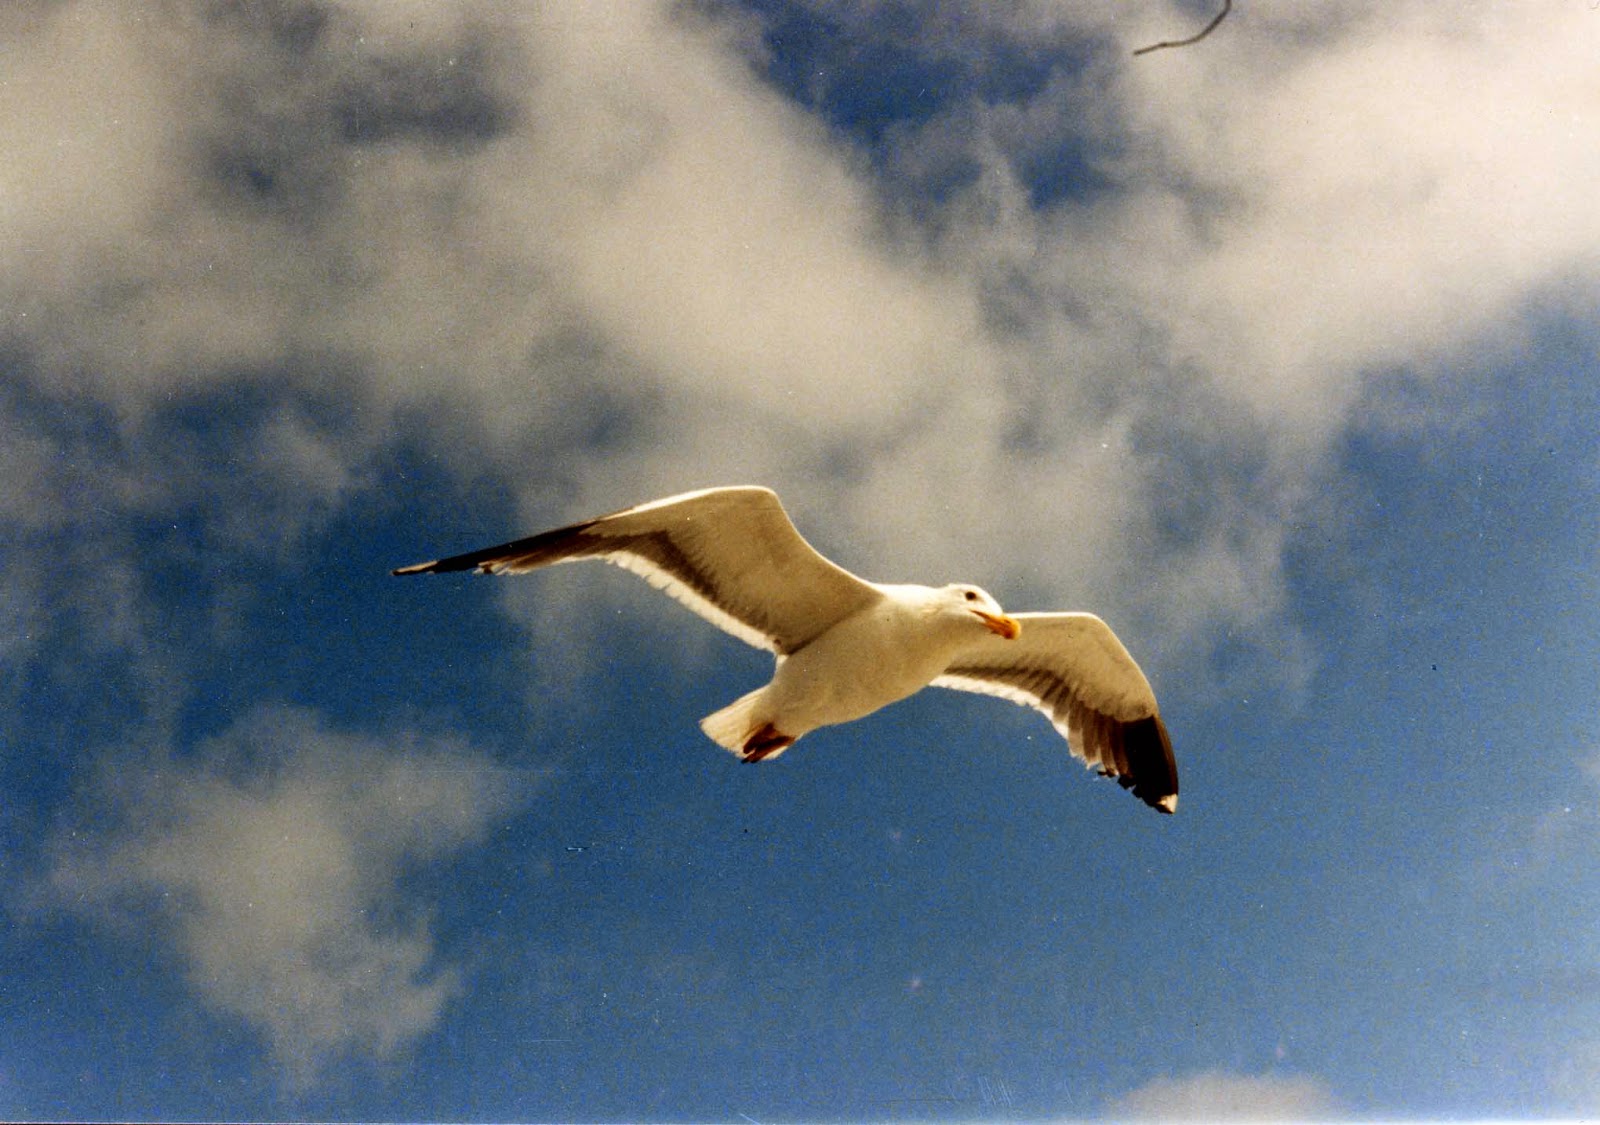 10 Books You Have To Read - Jonathan Livingston Seagull, by Richard Bach